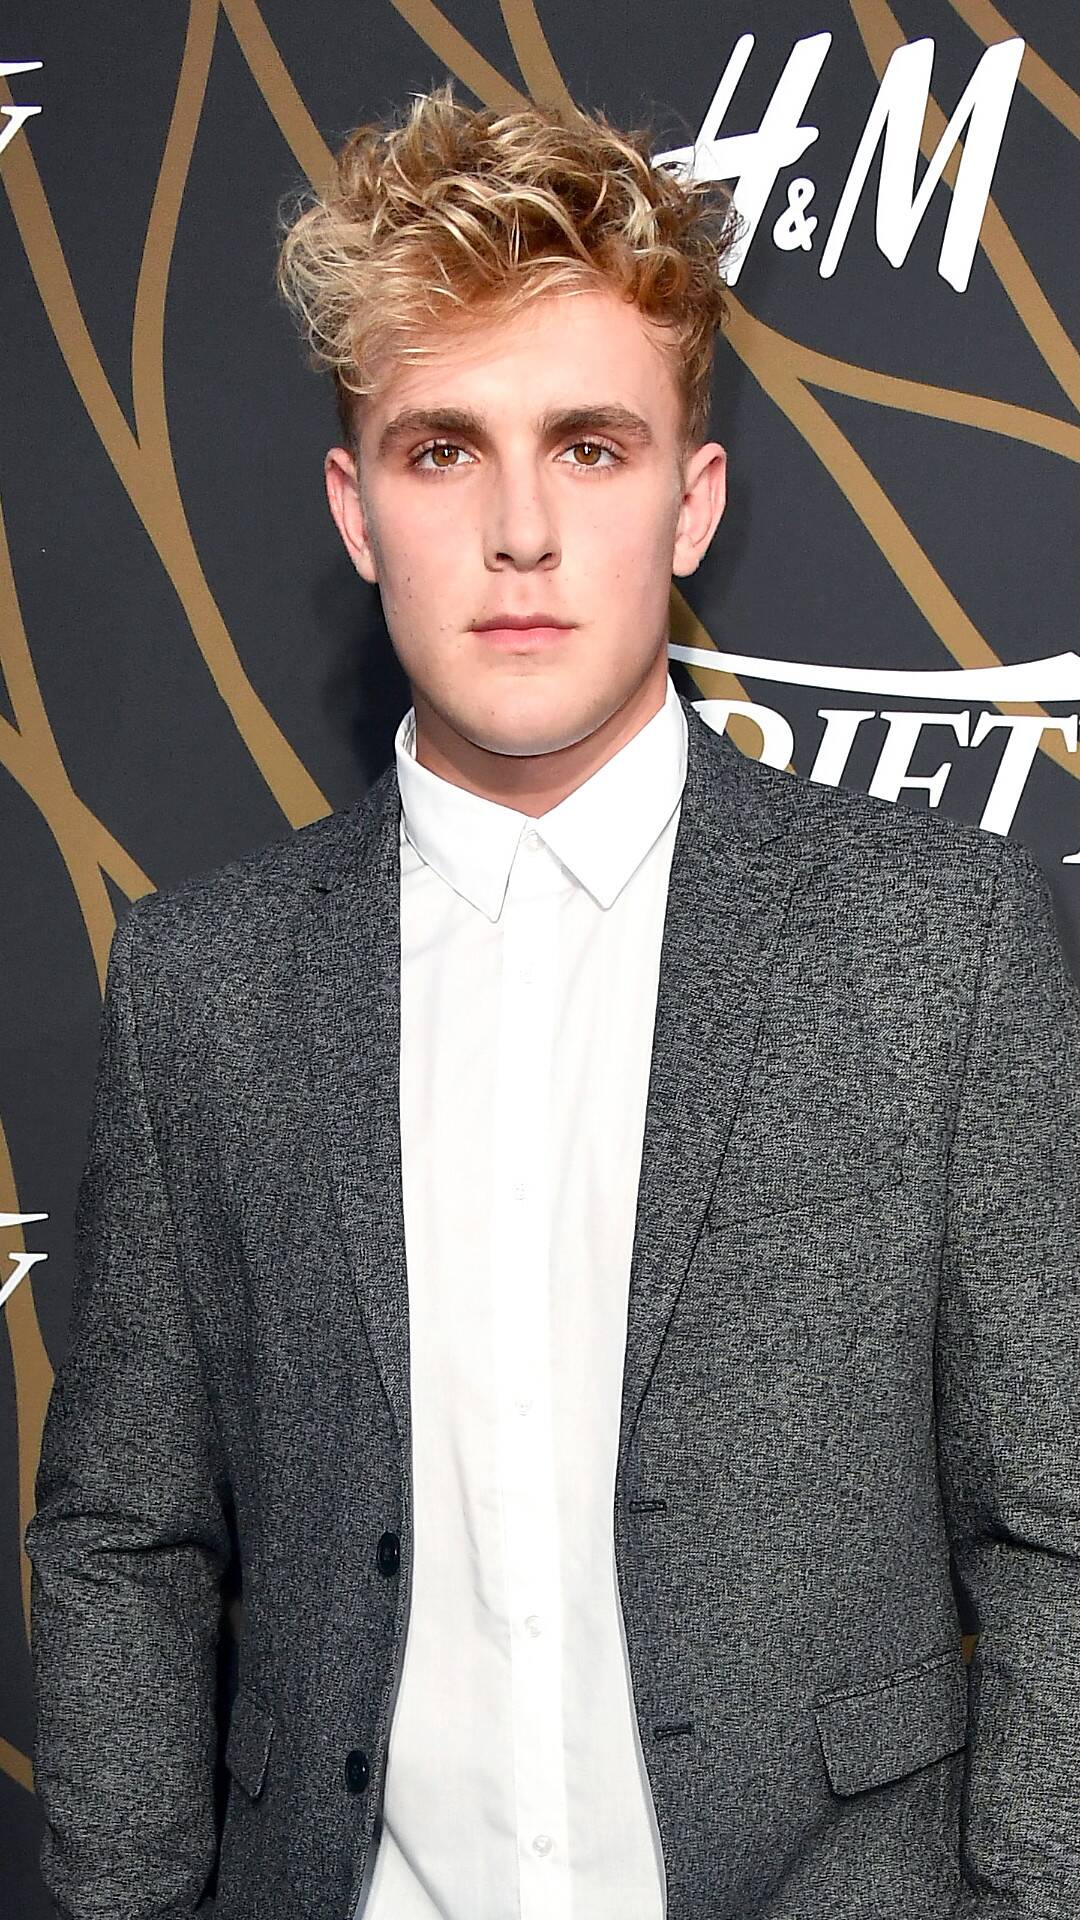 YouTube Star Jake Paul Speaks Out After He's Accused of Looting During Protests